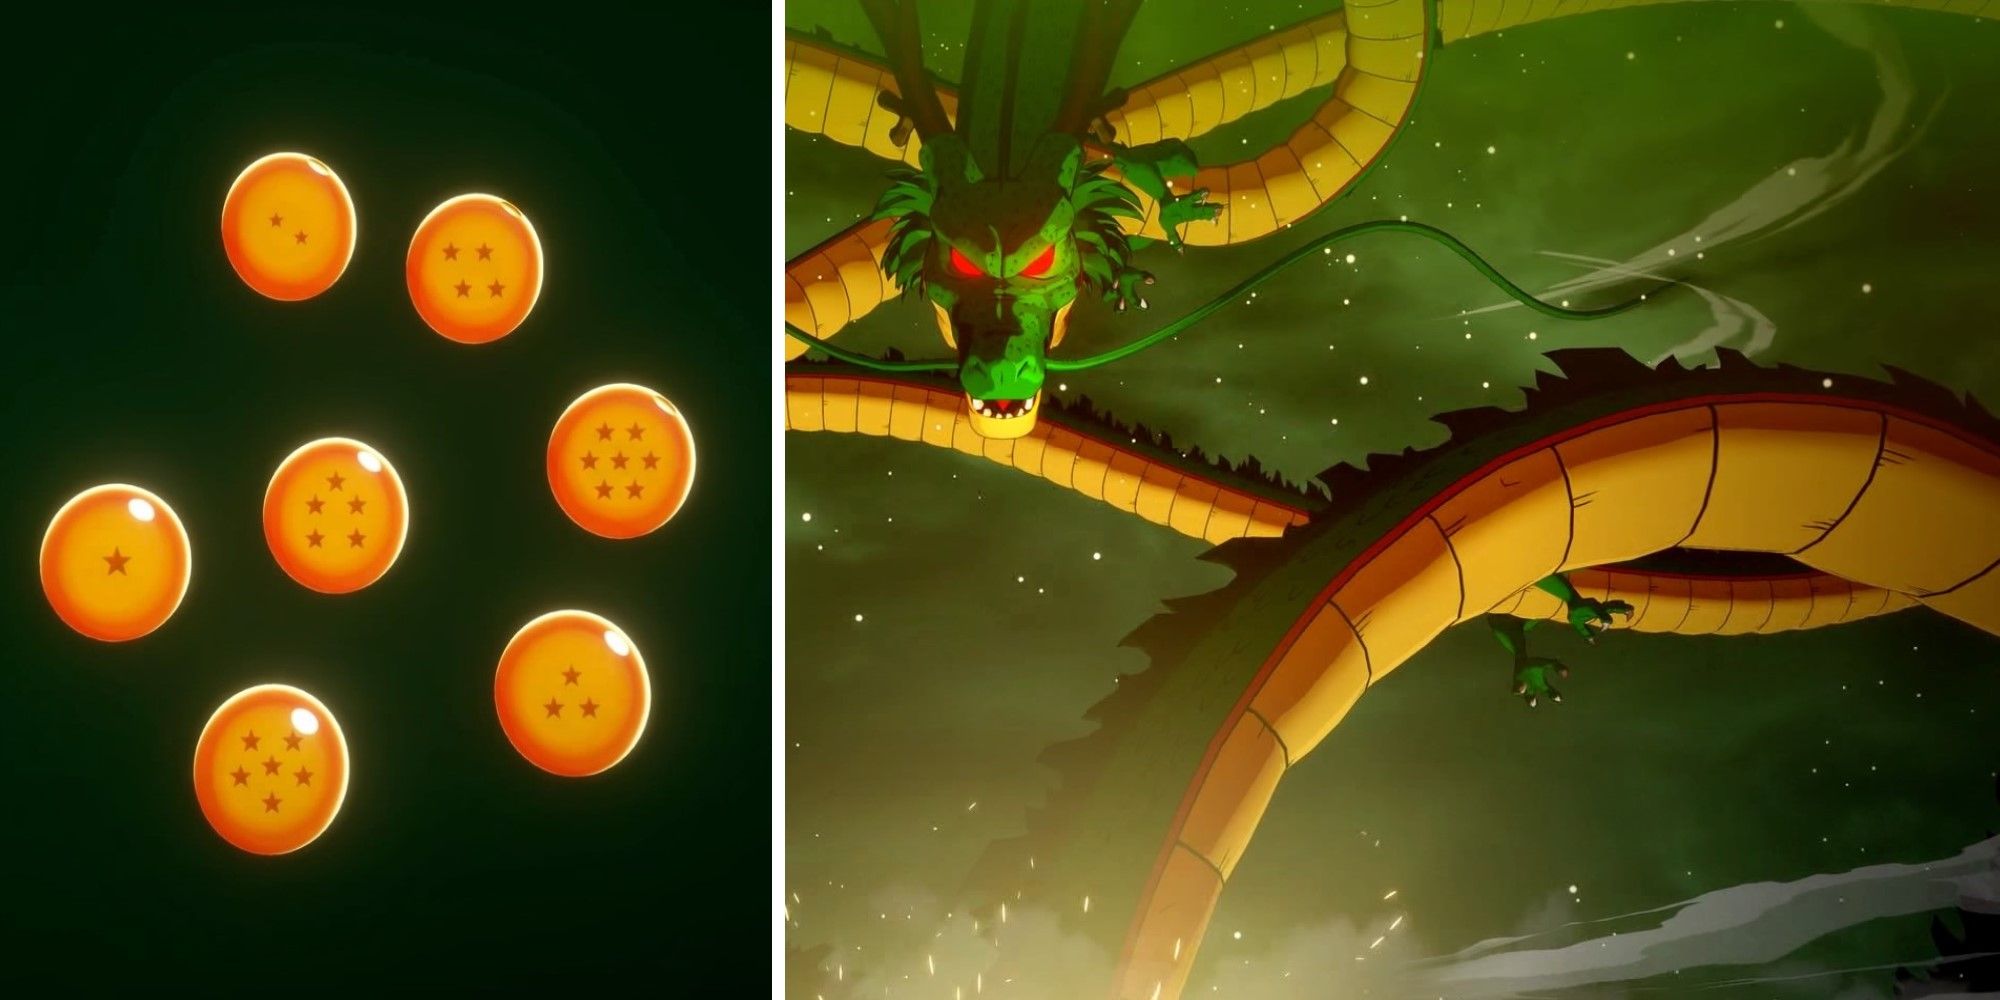 How to Get All 7 Dragon Balls and Summon Shenron in Dragon Ball